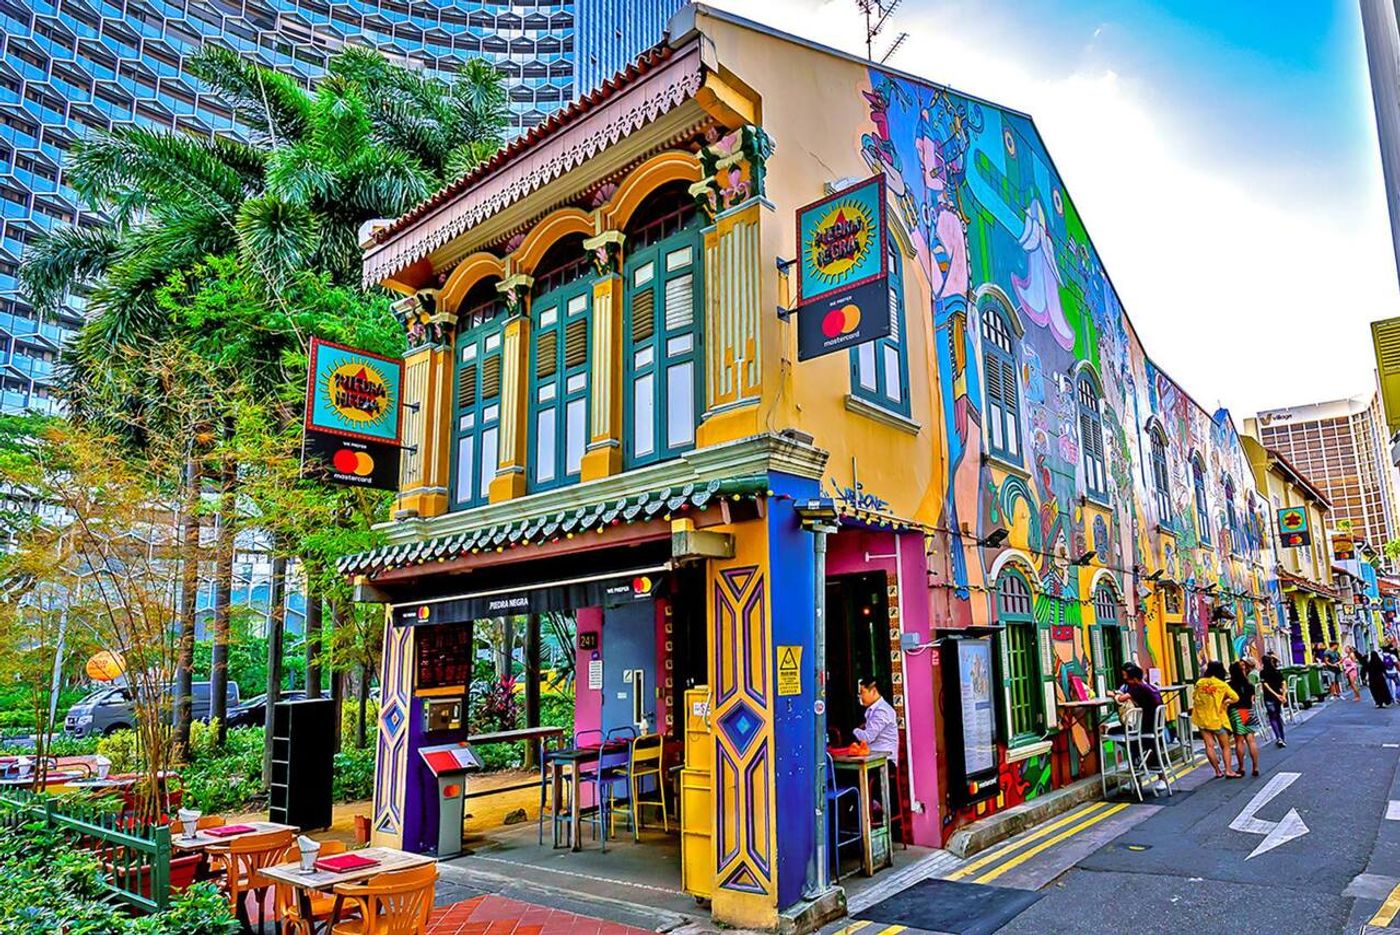 The amazing things to do in Little India, Singapore